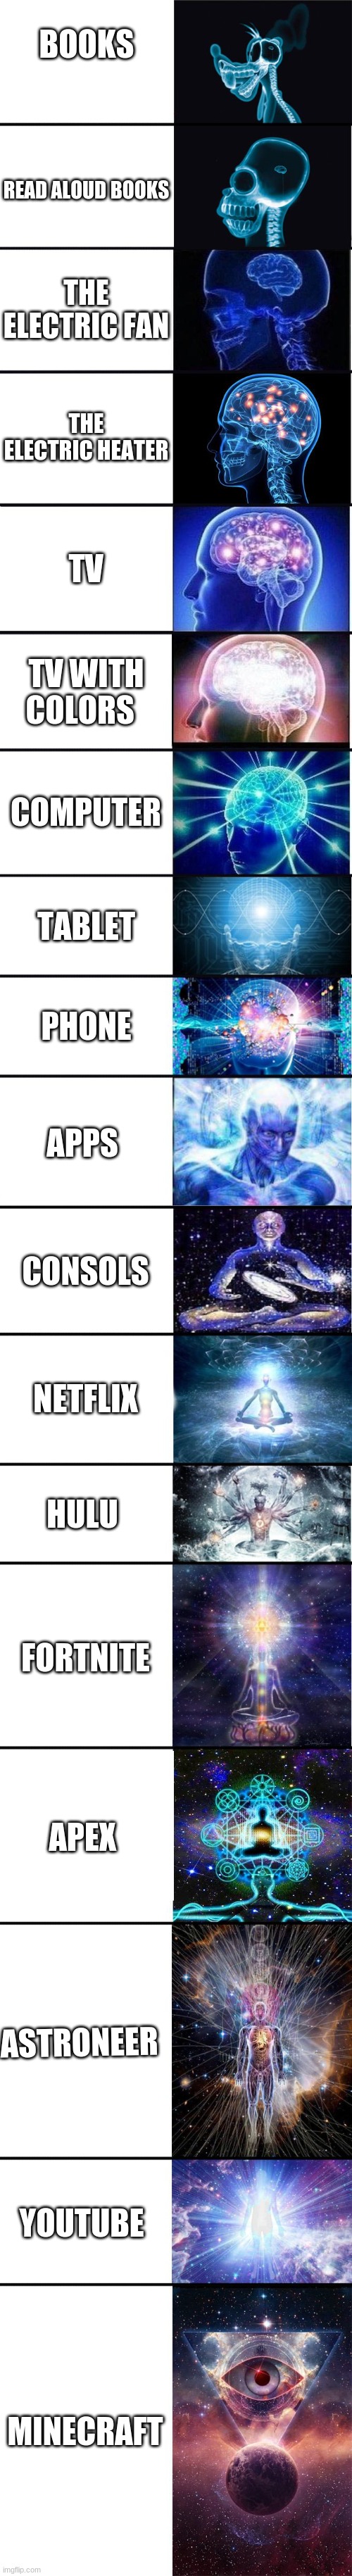 expanding brain: 9001 | BOOKS; READ ALOUD BOOKS; THE ELECTRIC FAN; THE ELECTRIC HEATER; TV; TV WITH COLORS; COMPUTER; TABLET; PHONE; APPS; CONSOLS; NETFLIX; HULU; FORTNITE; APEX; ASTRONEER; YOUTUBE; MINECRAFT | image tagged in expanding brain 9001 | made w/ Imgflip meme maker